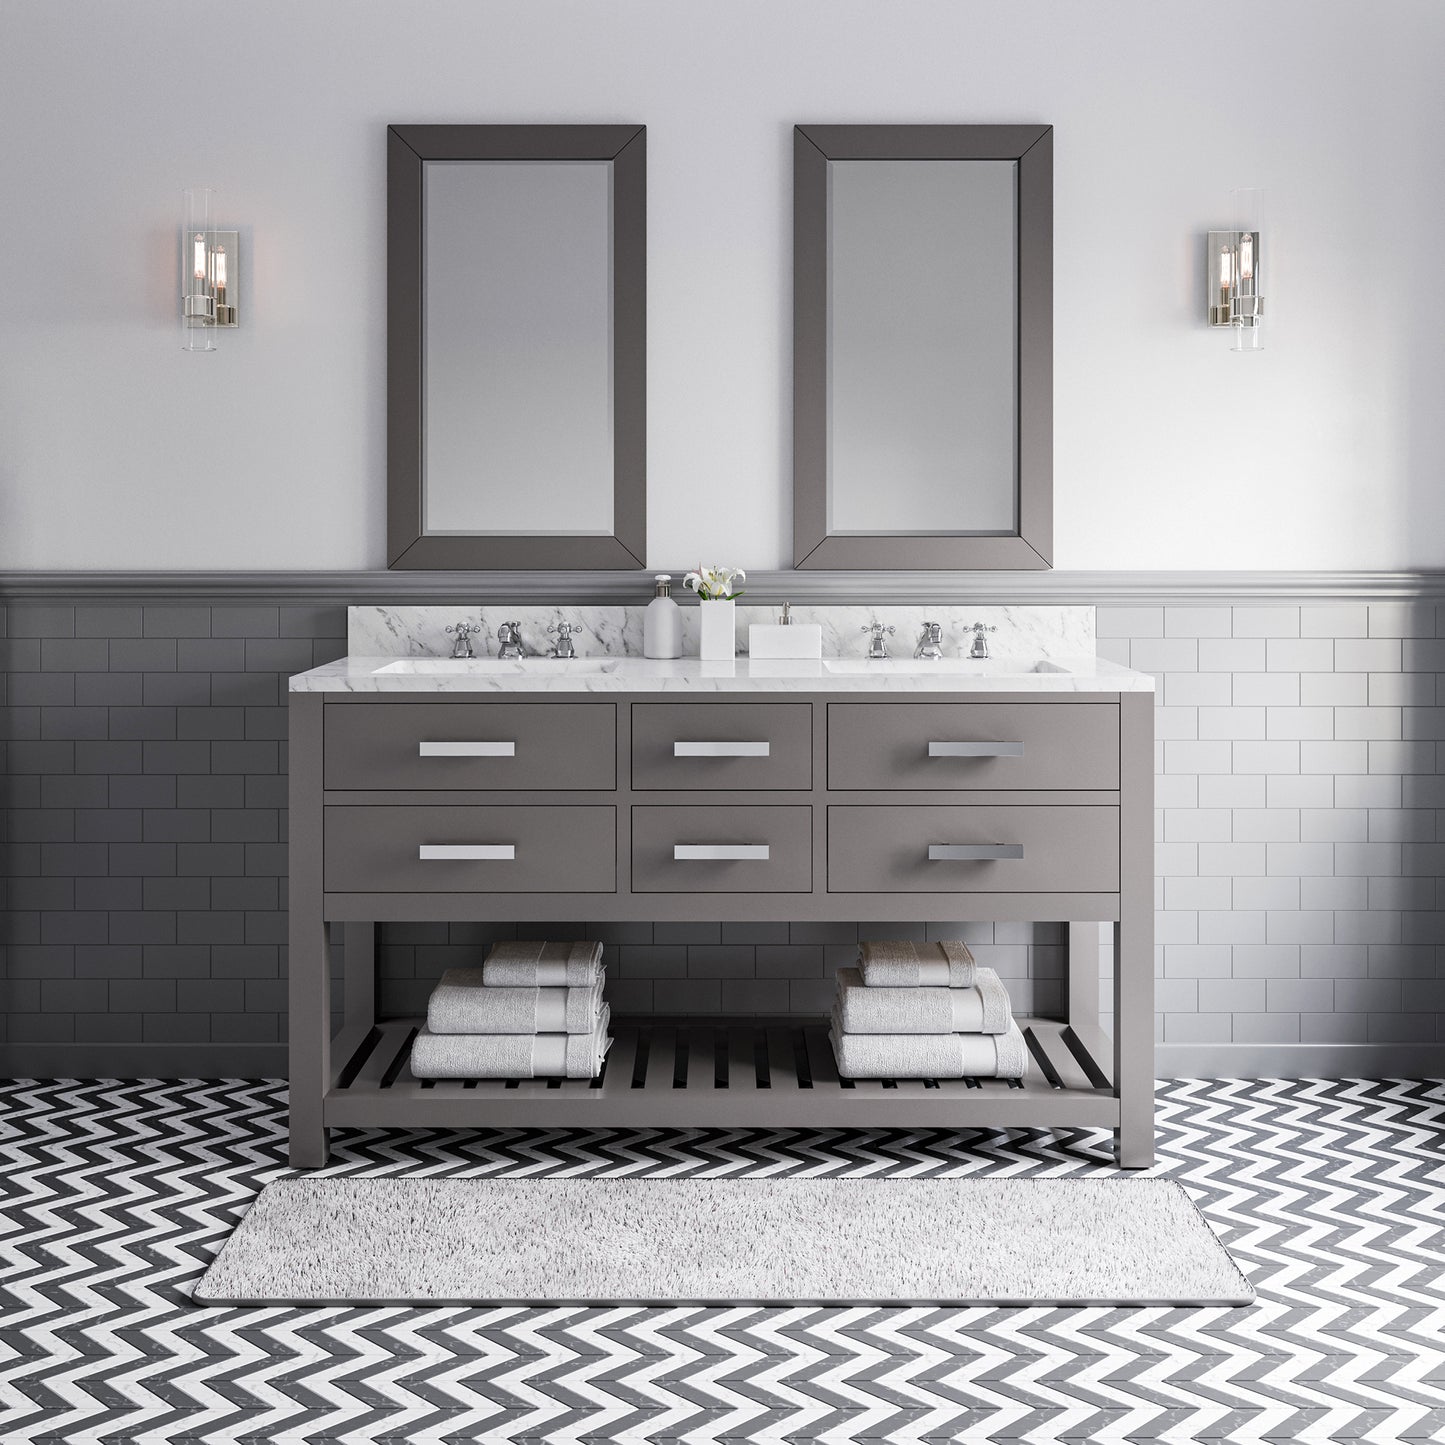 MADALYN 60"W x 34"H Cashmere Gray Double-Sink Vanity + Faucets